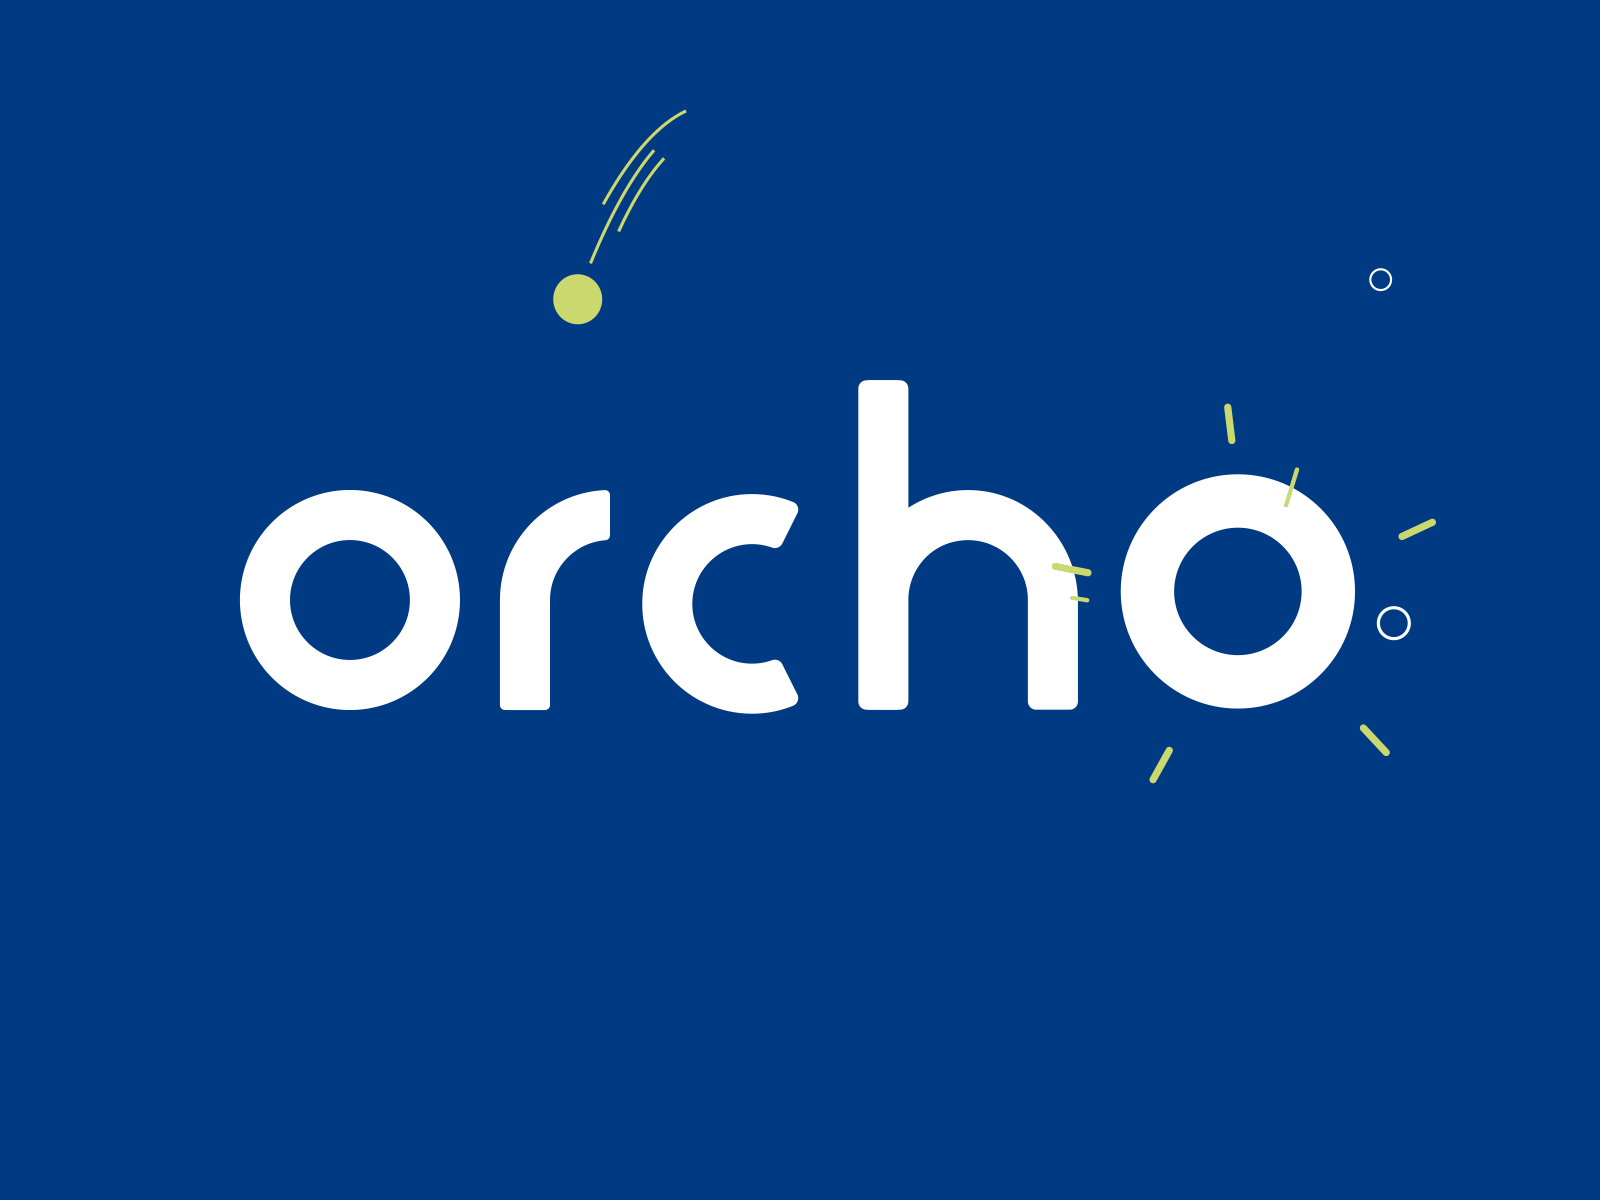 Orcho in blue